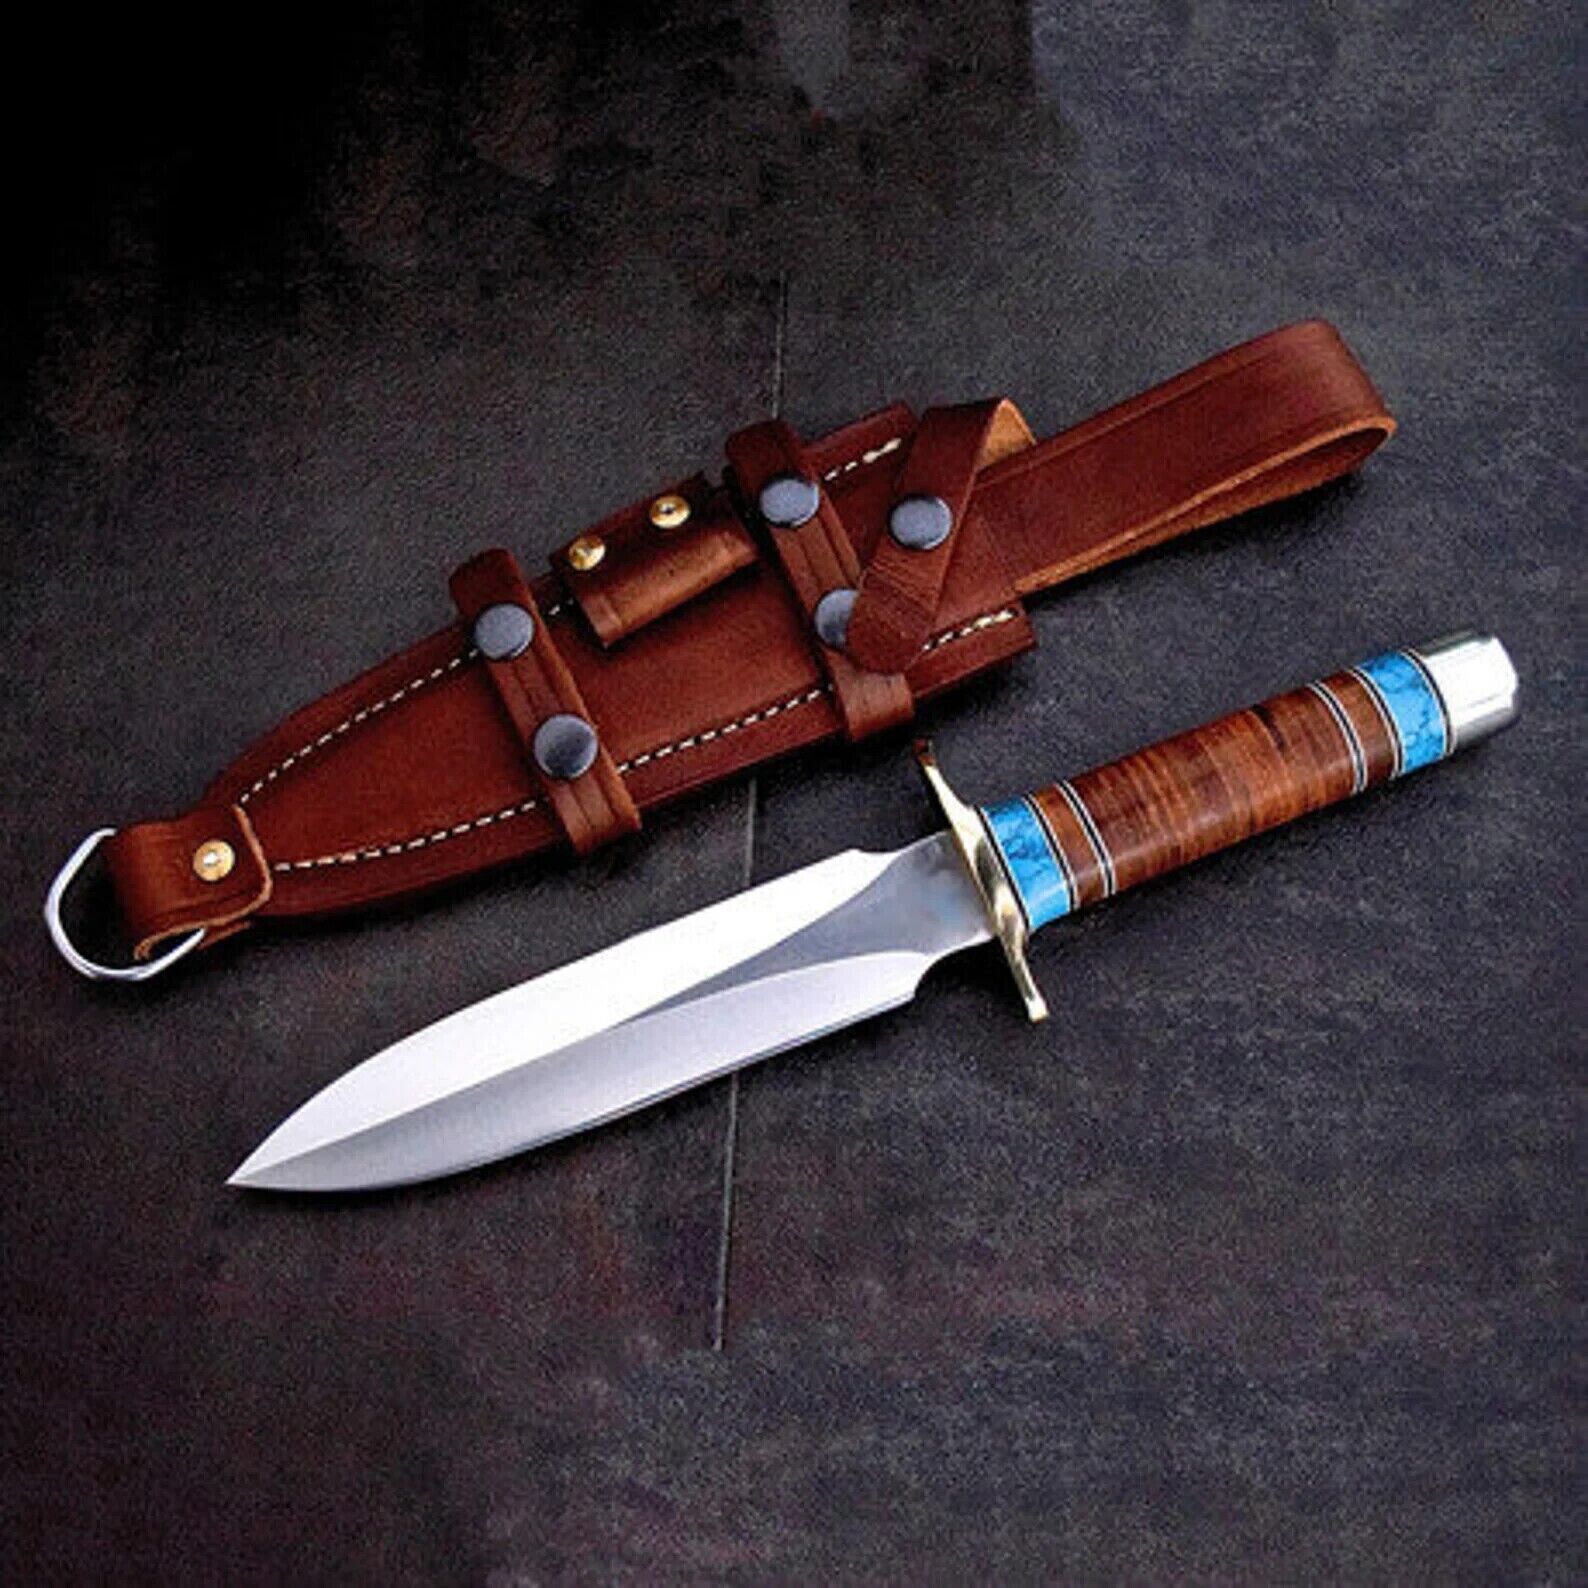 CUSTOM HANDMADE D2 TOOL STEEL HUNTING DAGGER KNIFE WITH STACKED LEATHER HANDLE